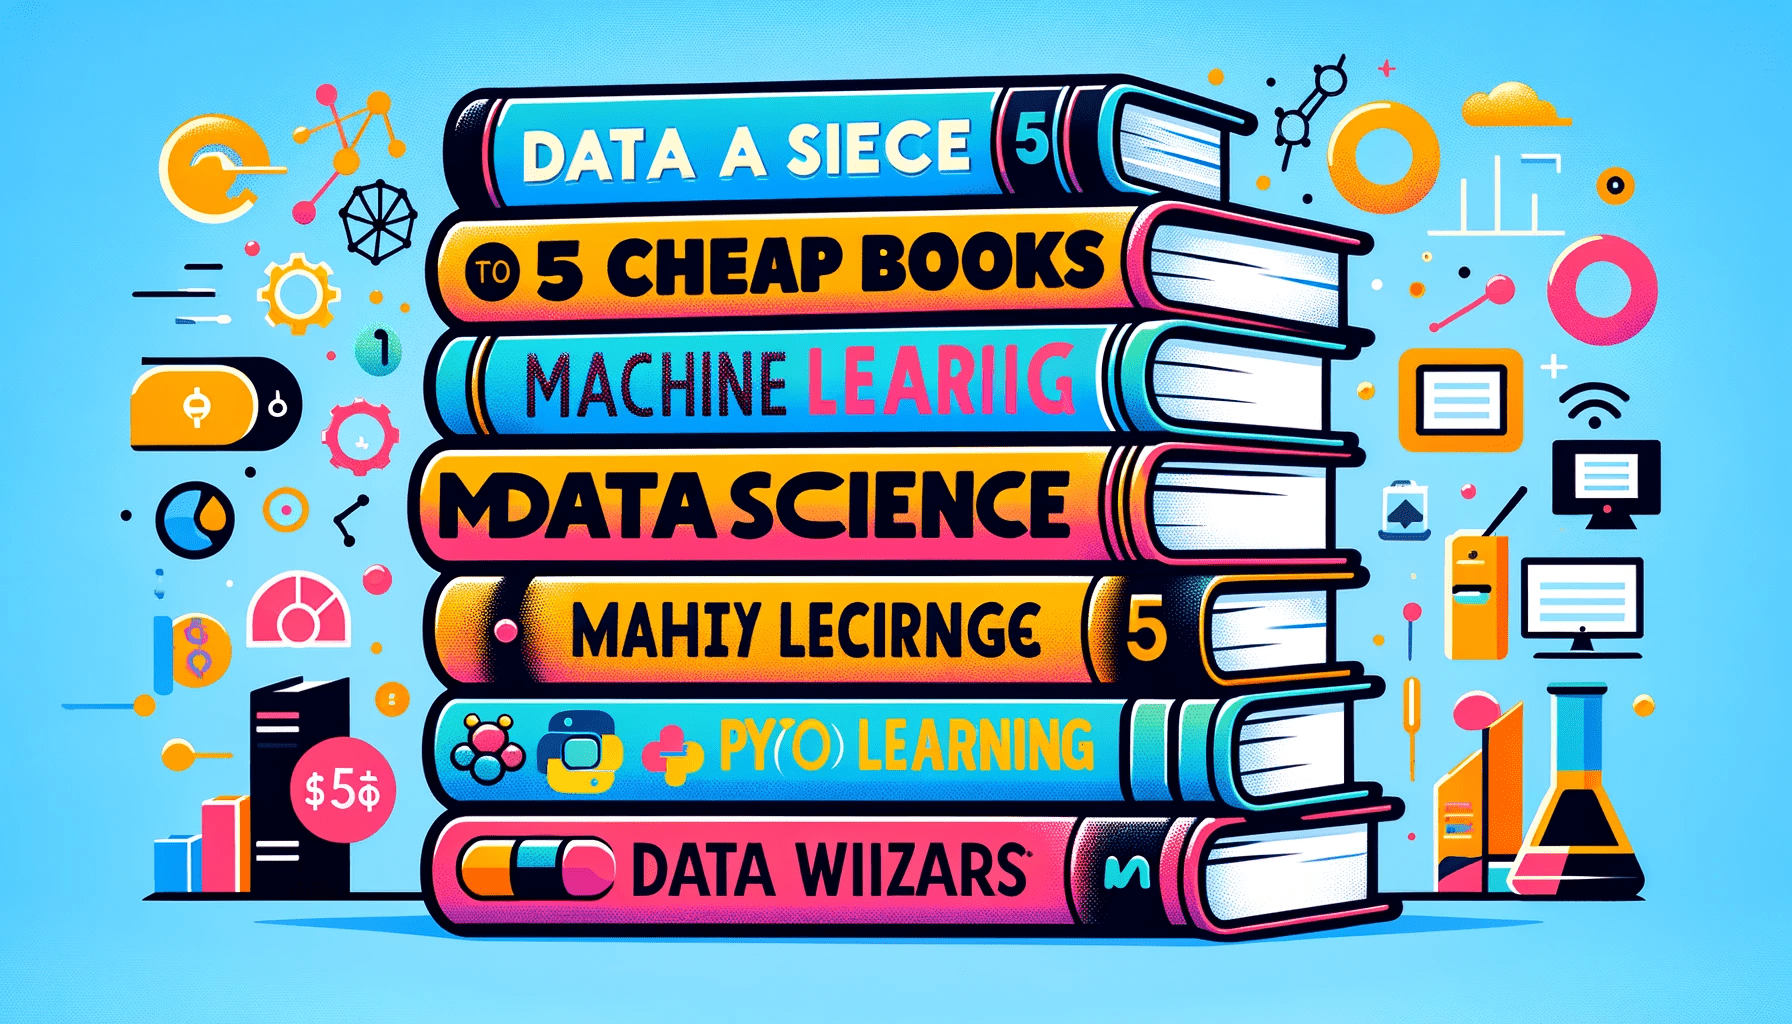 5 Cheap Books to Master Data Science